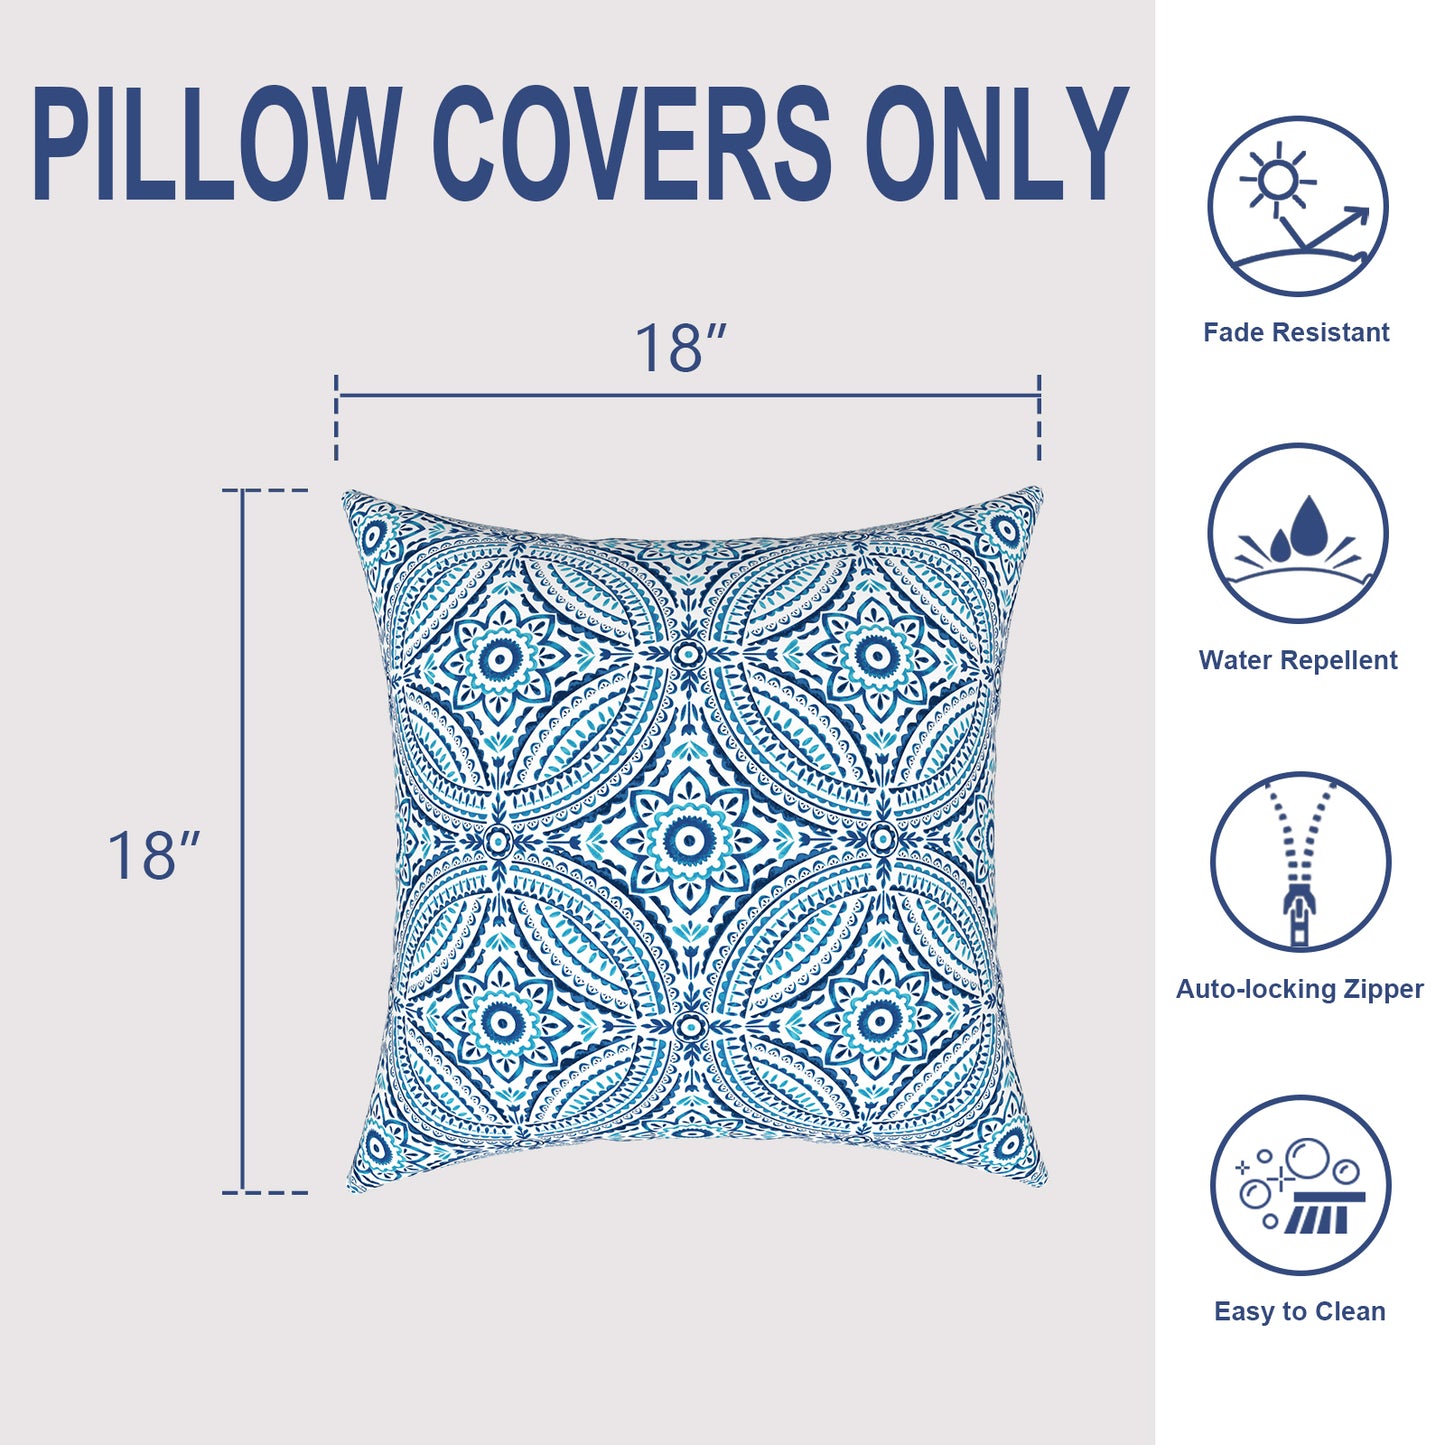 Melody Elephant Outdoor Throw Pillow Covers Pack of 2, Decorative Water Repellent Square Pillow Cases 18x18 Inch, Patio Pillowcases for Home Patio Furniture Use, Delancey Baltic